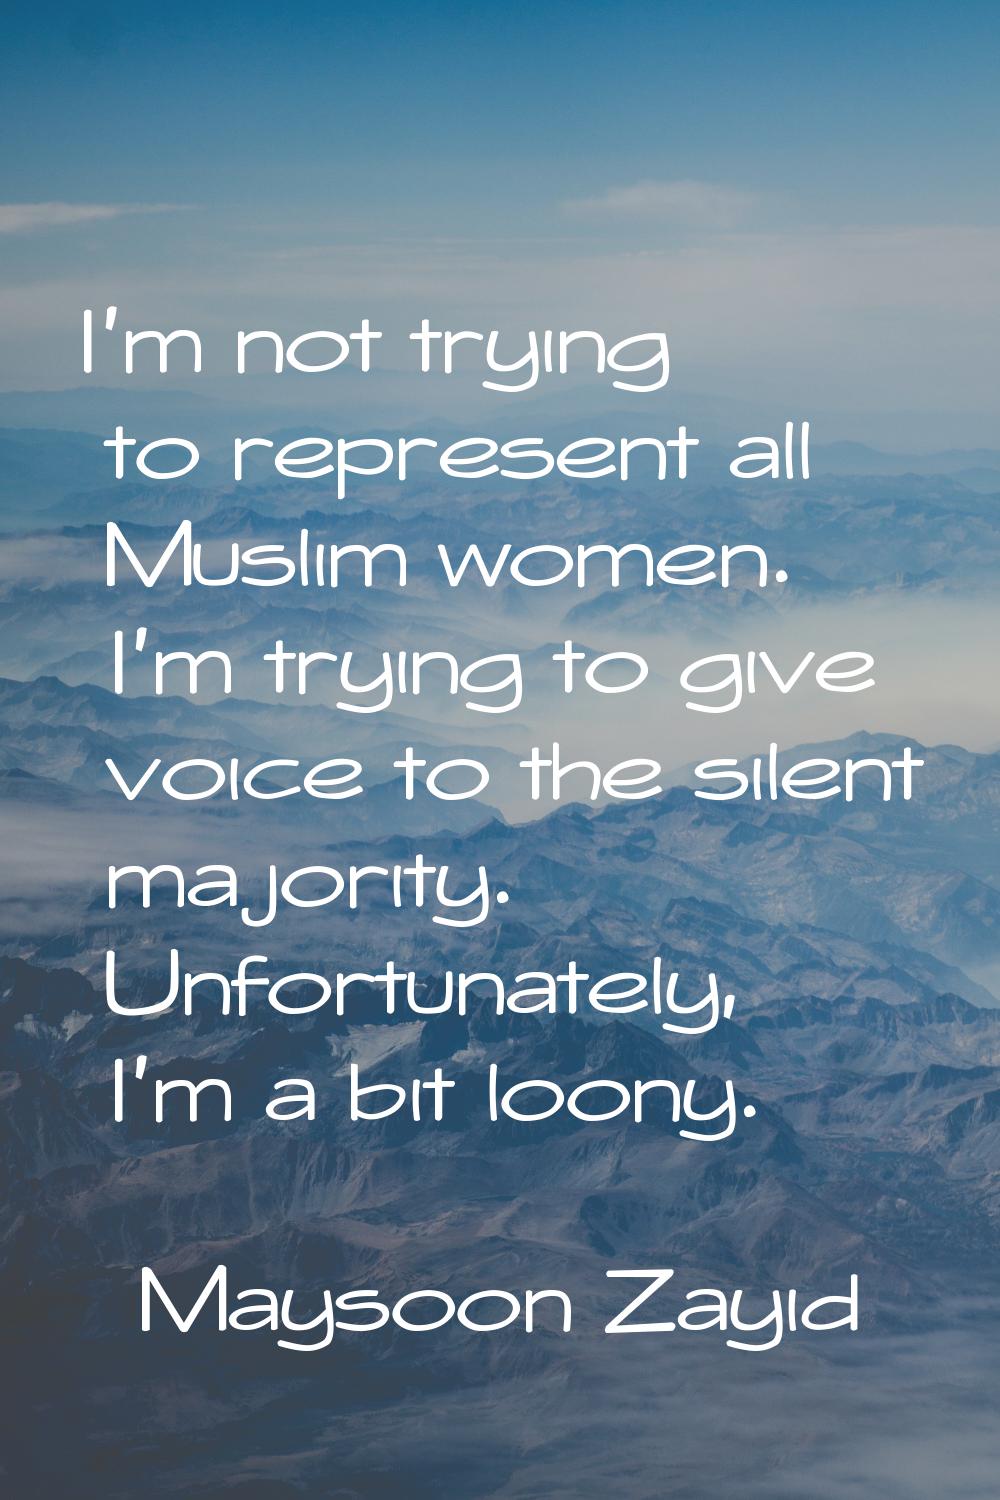 I'm not trying to represent all Muslim women. I'm trying to give voice to the silent majority. Unfo